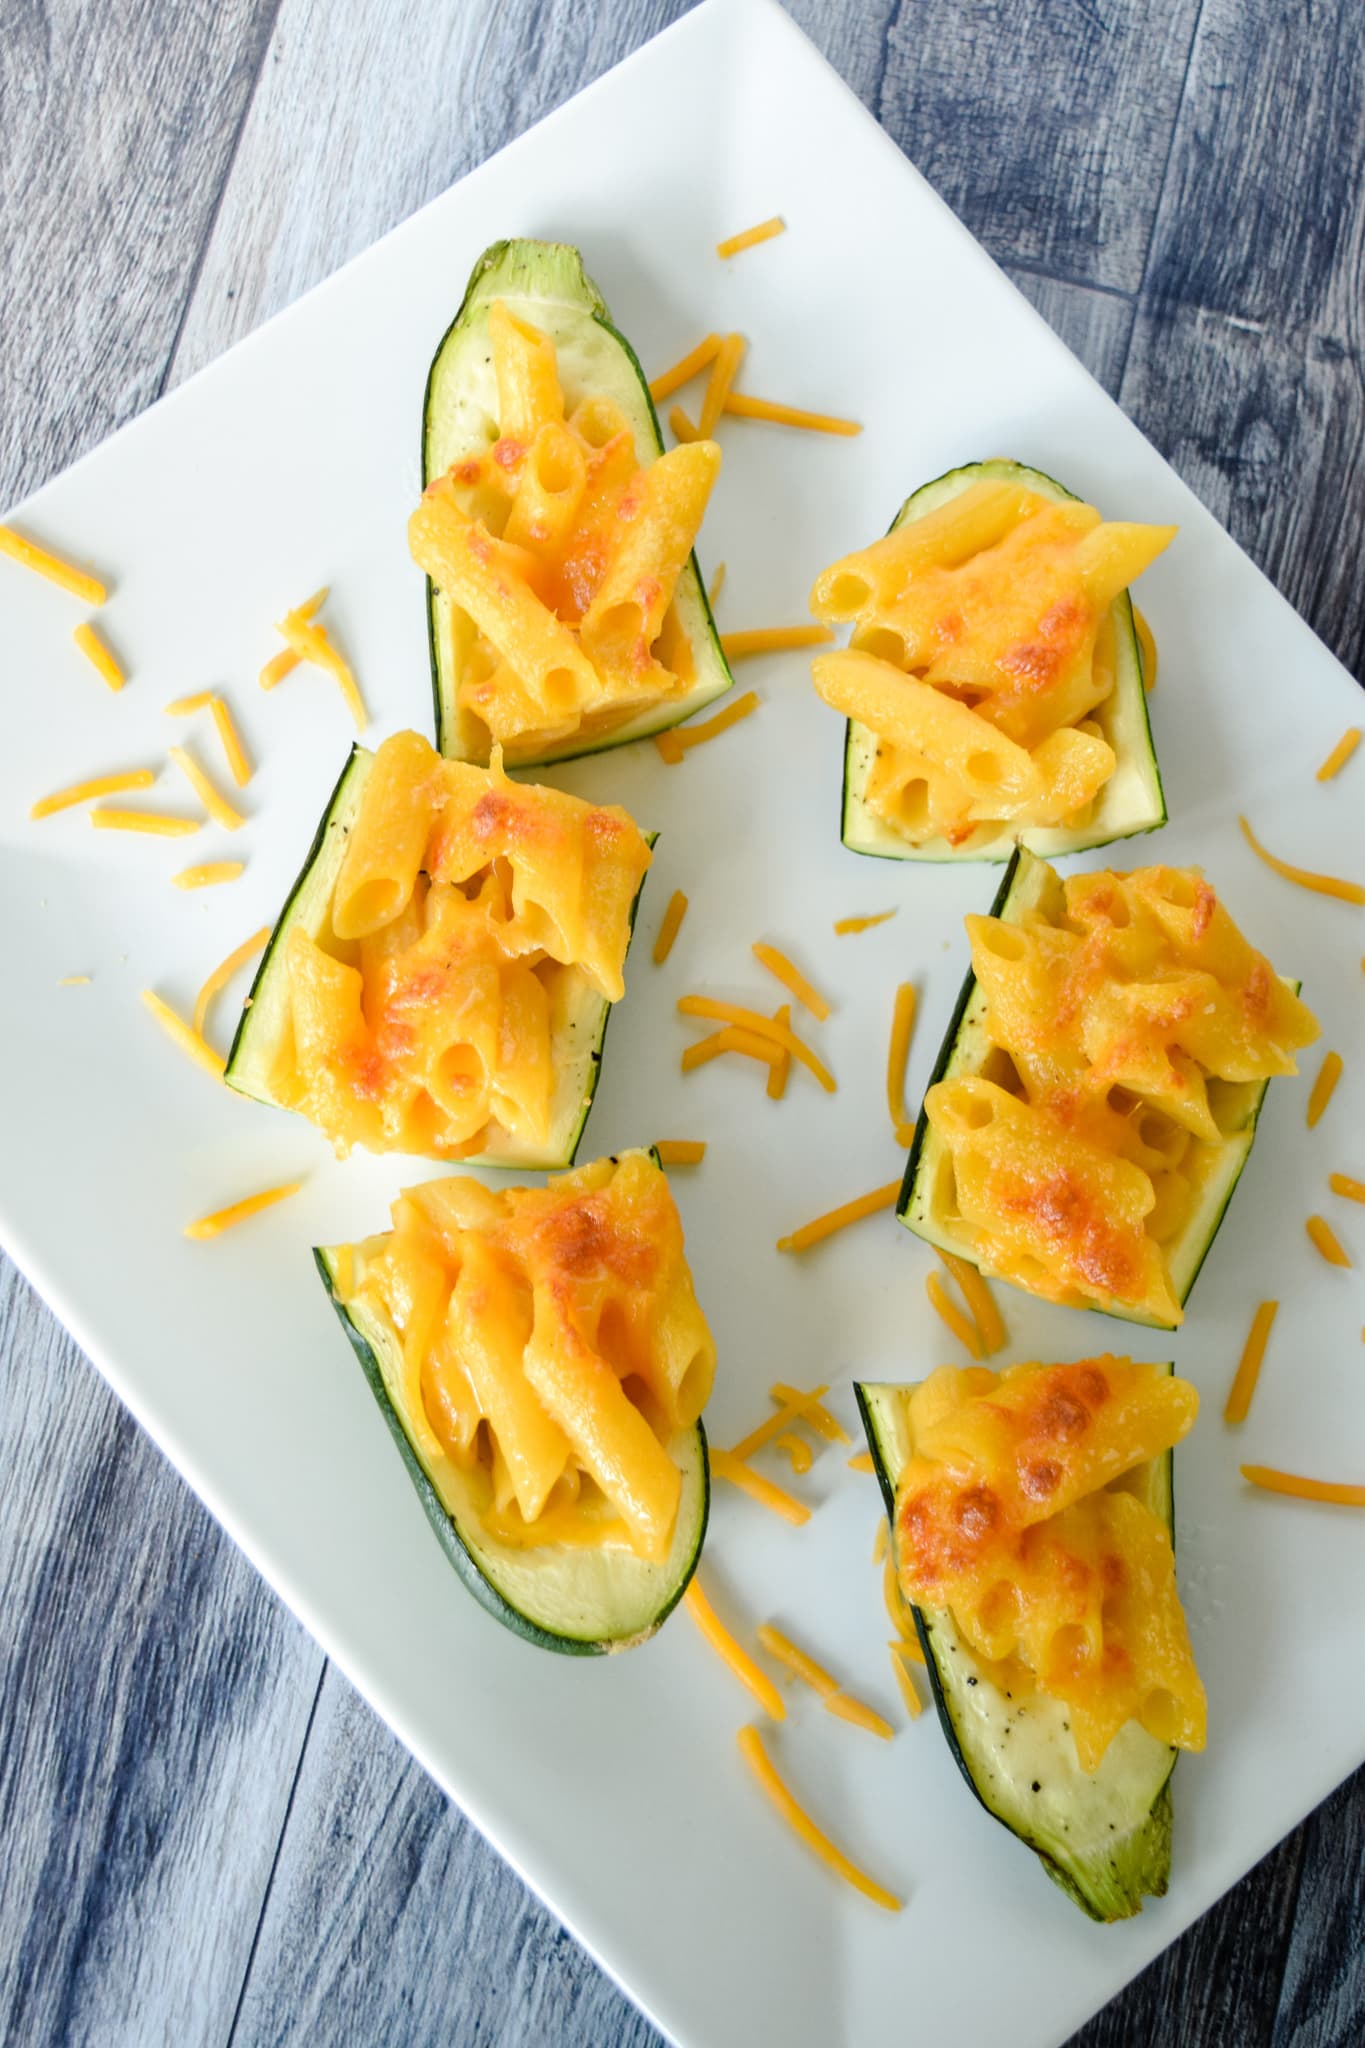 Cut up Zucchini boats with gluten free mac and cheese